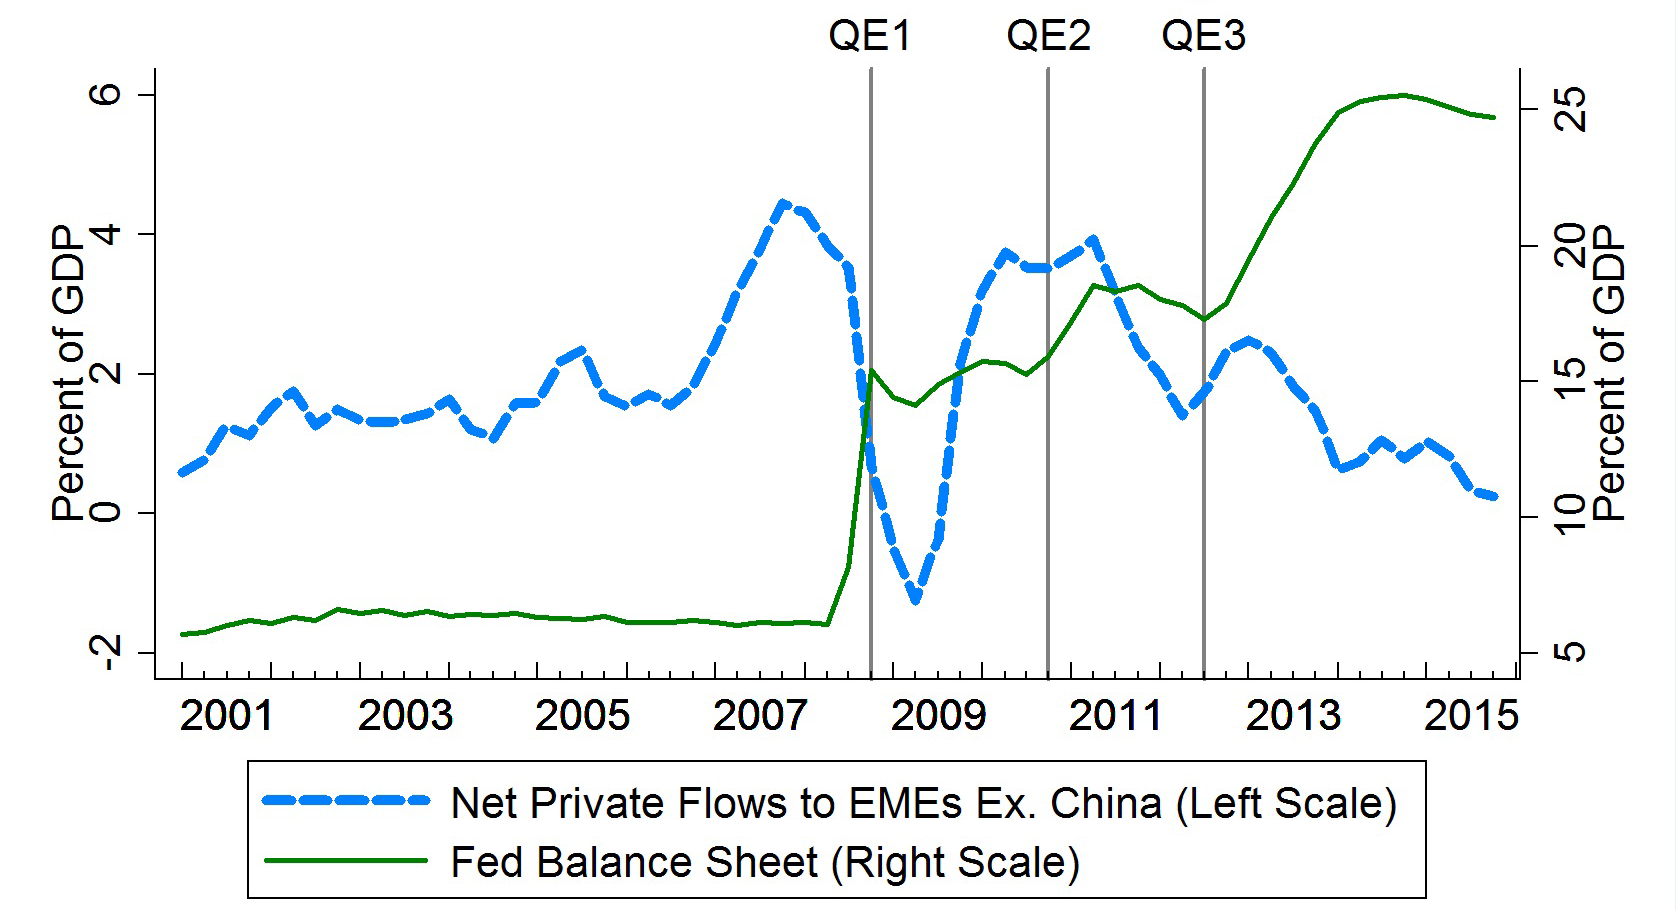 Chart 4: Net Private Flows, Fed Balance Sheet, and U.S. Quantitative Easing. See accessible link for data.